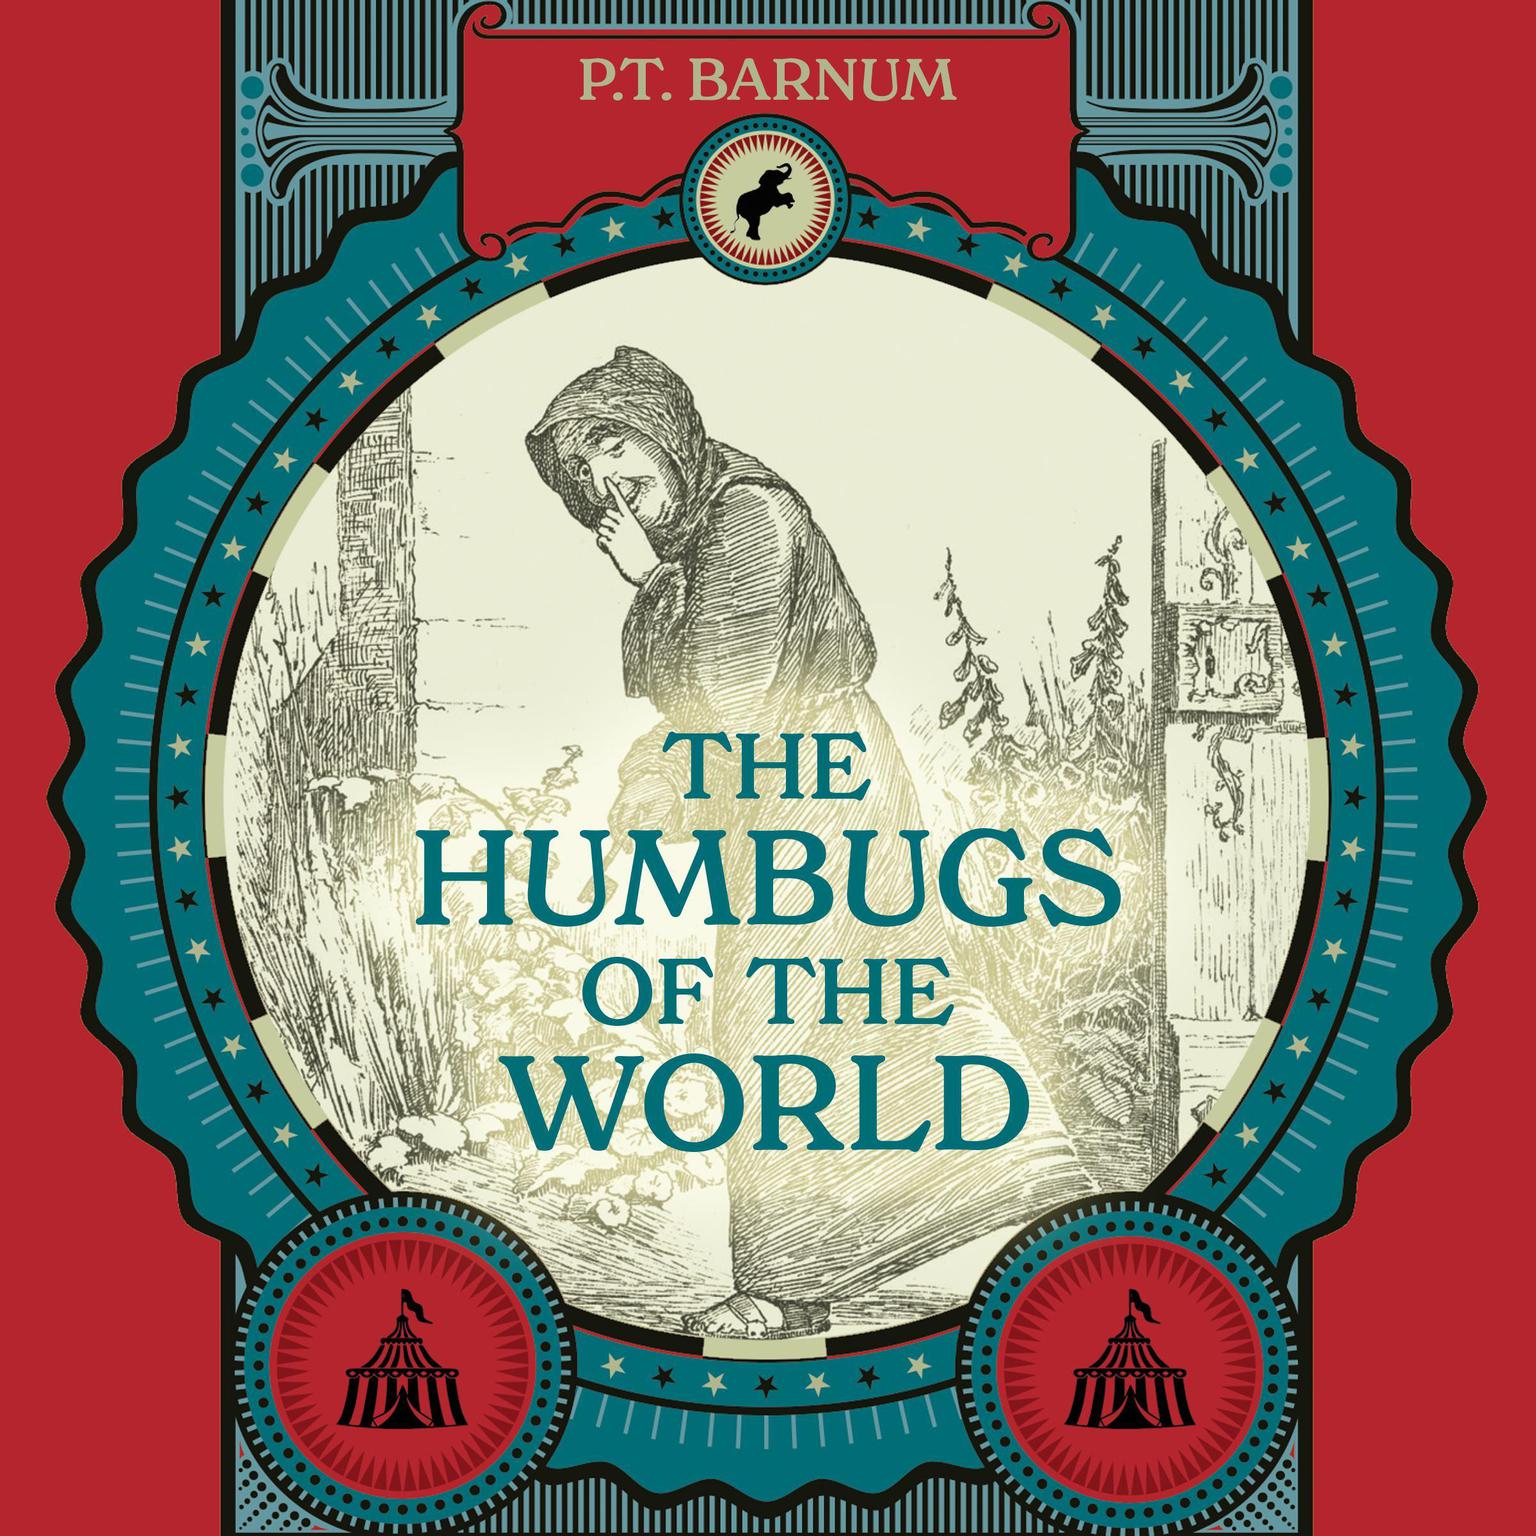 The Humbugs of the World: An Account of Humbugs, Delusions, Impositions, Quackeries, Deceits, and Deceivers Generally, in All Ages Audiobook, by P. T. Barnum